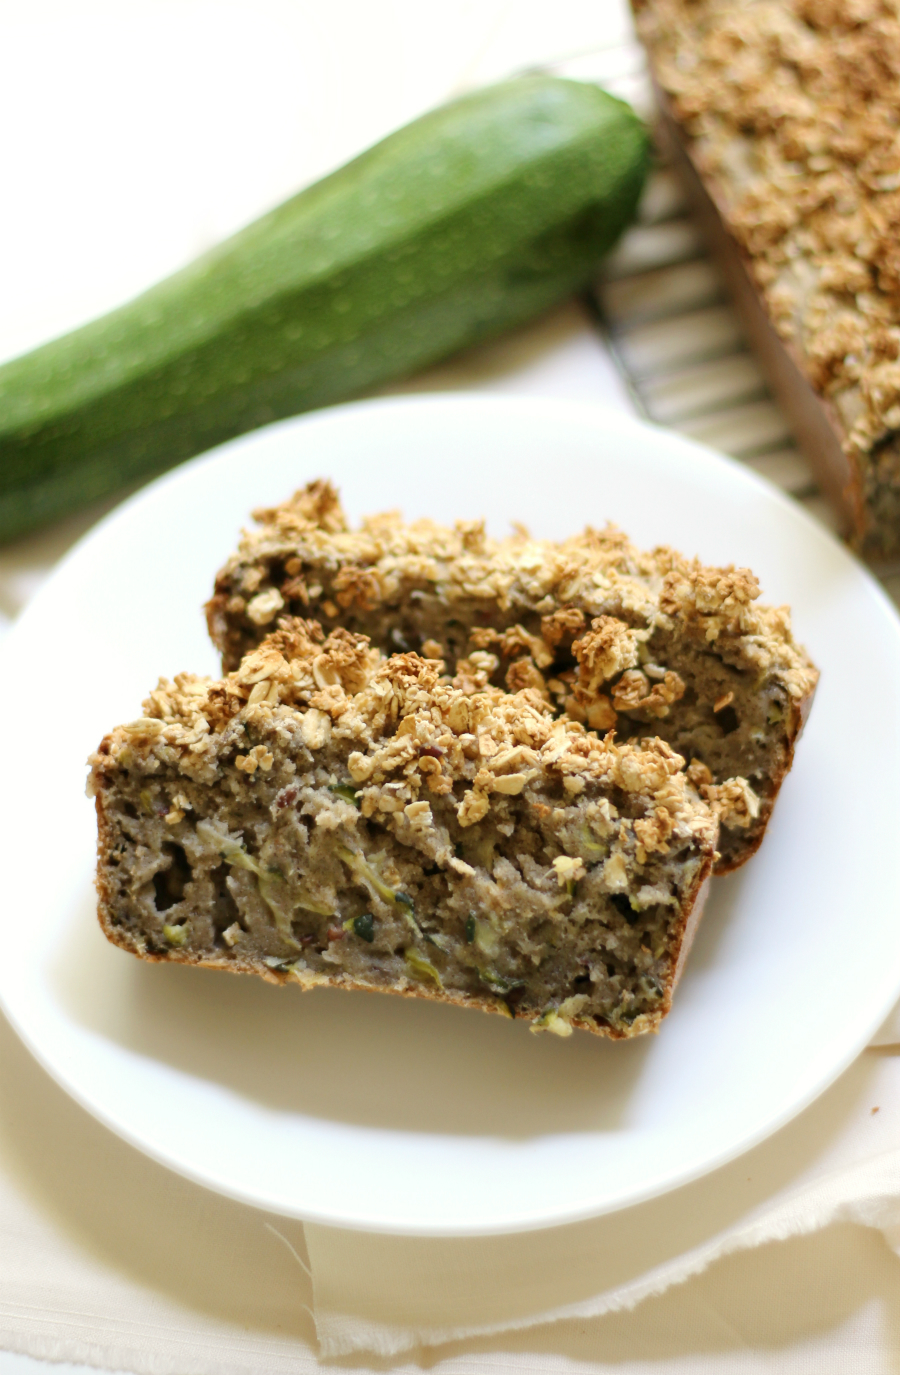 Gluten-Free Zucchini Bread with Maple Oat Crumble | Strength and Sunshine @RebeccaGF666 A classic with a twist! Gluten-Free Zucchini Bread with Maple Oat Crumble! A vegan, healthy, and more delicious way to bake your favorite summer quick bread recipe. Moist slices of zucchini bread with the comforting flavors of warm maple and oven-toasted oats!